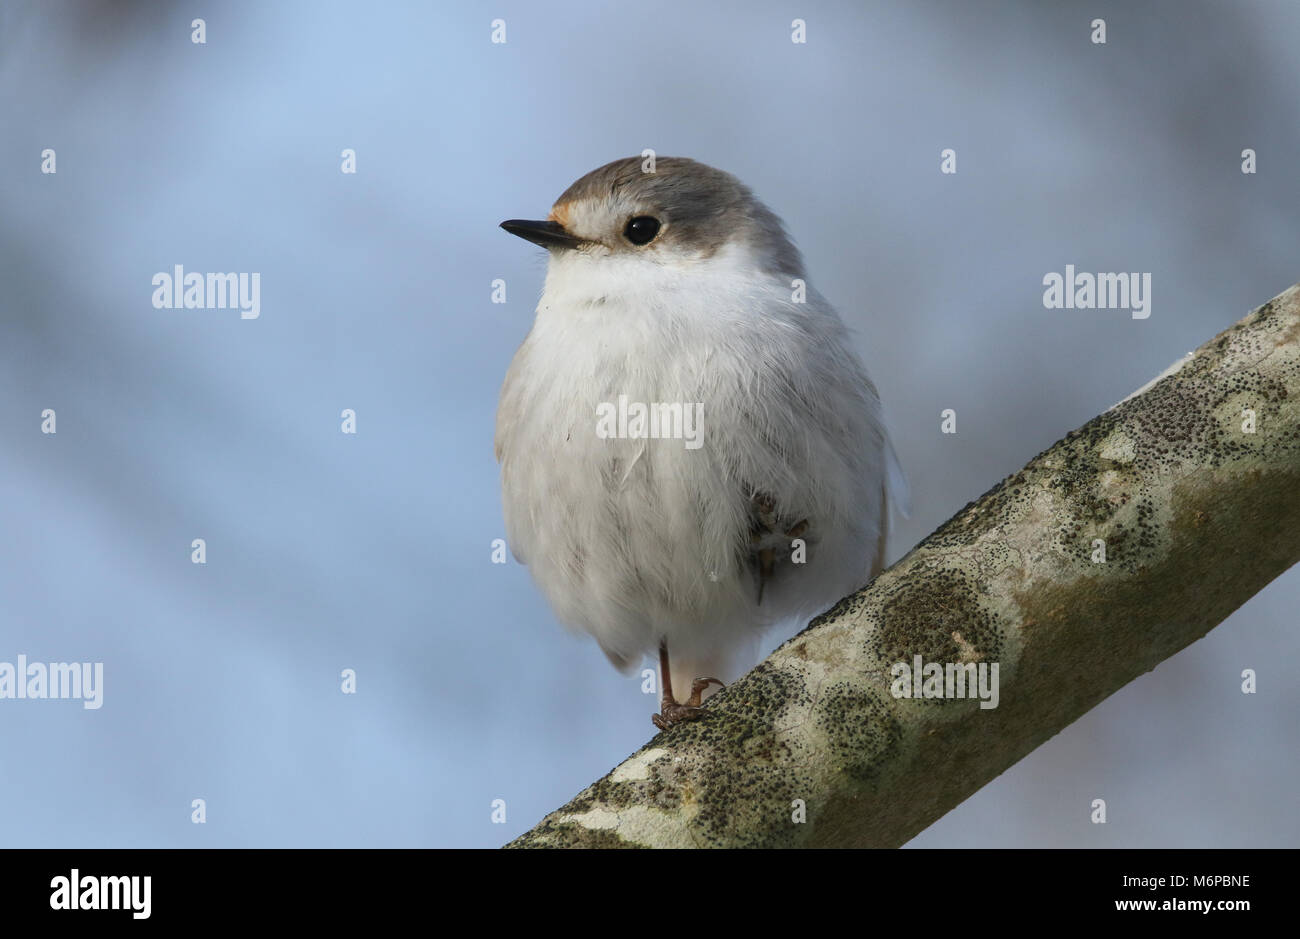 A stunning rare Leucistic Robin (Erithacus rubecula) perched on a branch on a cold winters day. Stock Photo